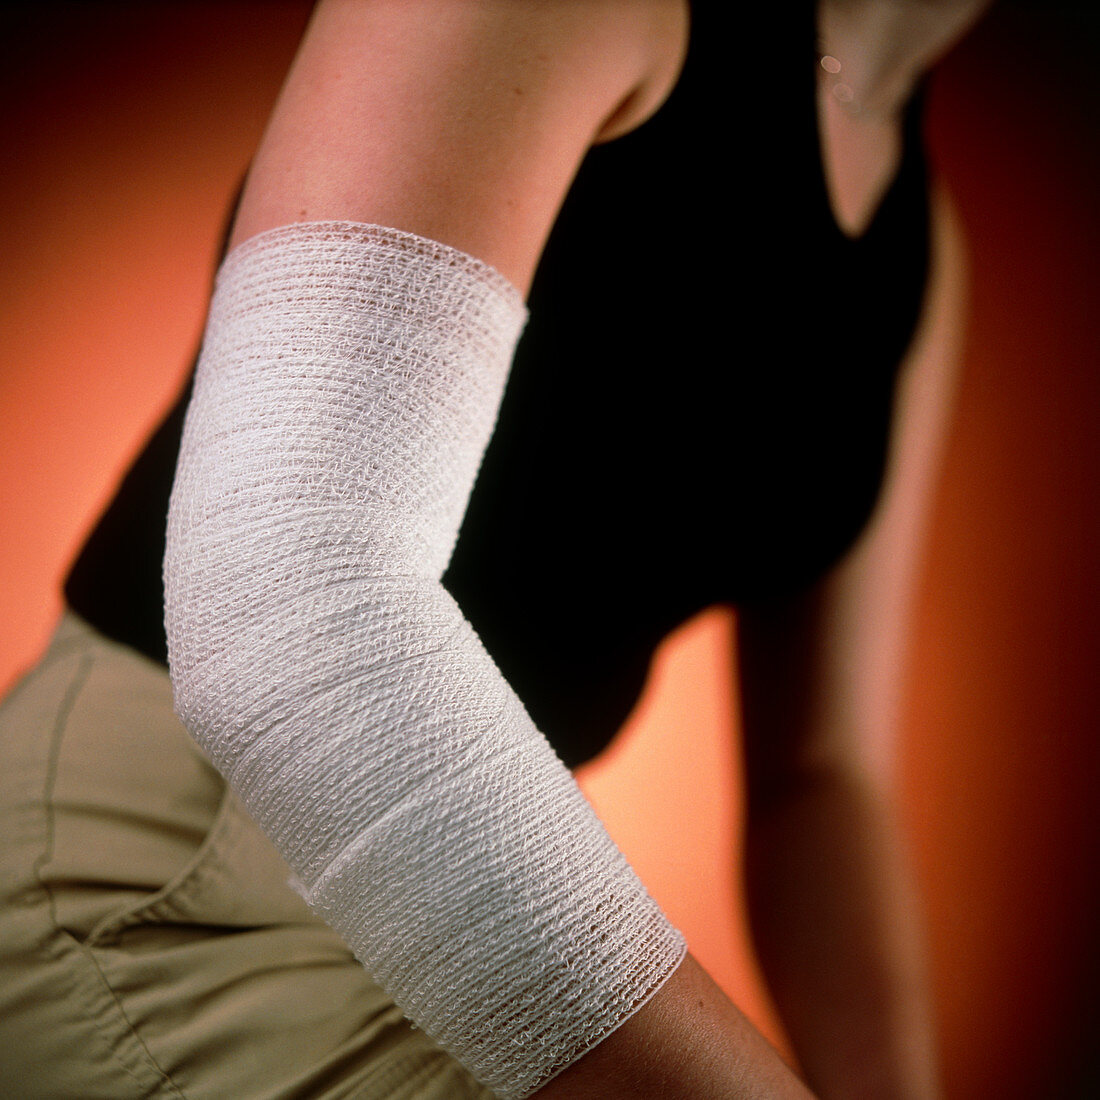 View of the bandaged elbow of a young woman